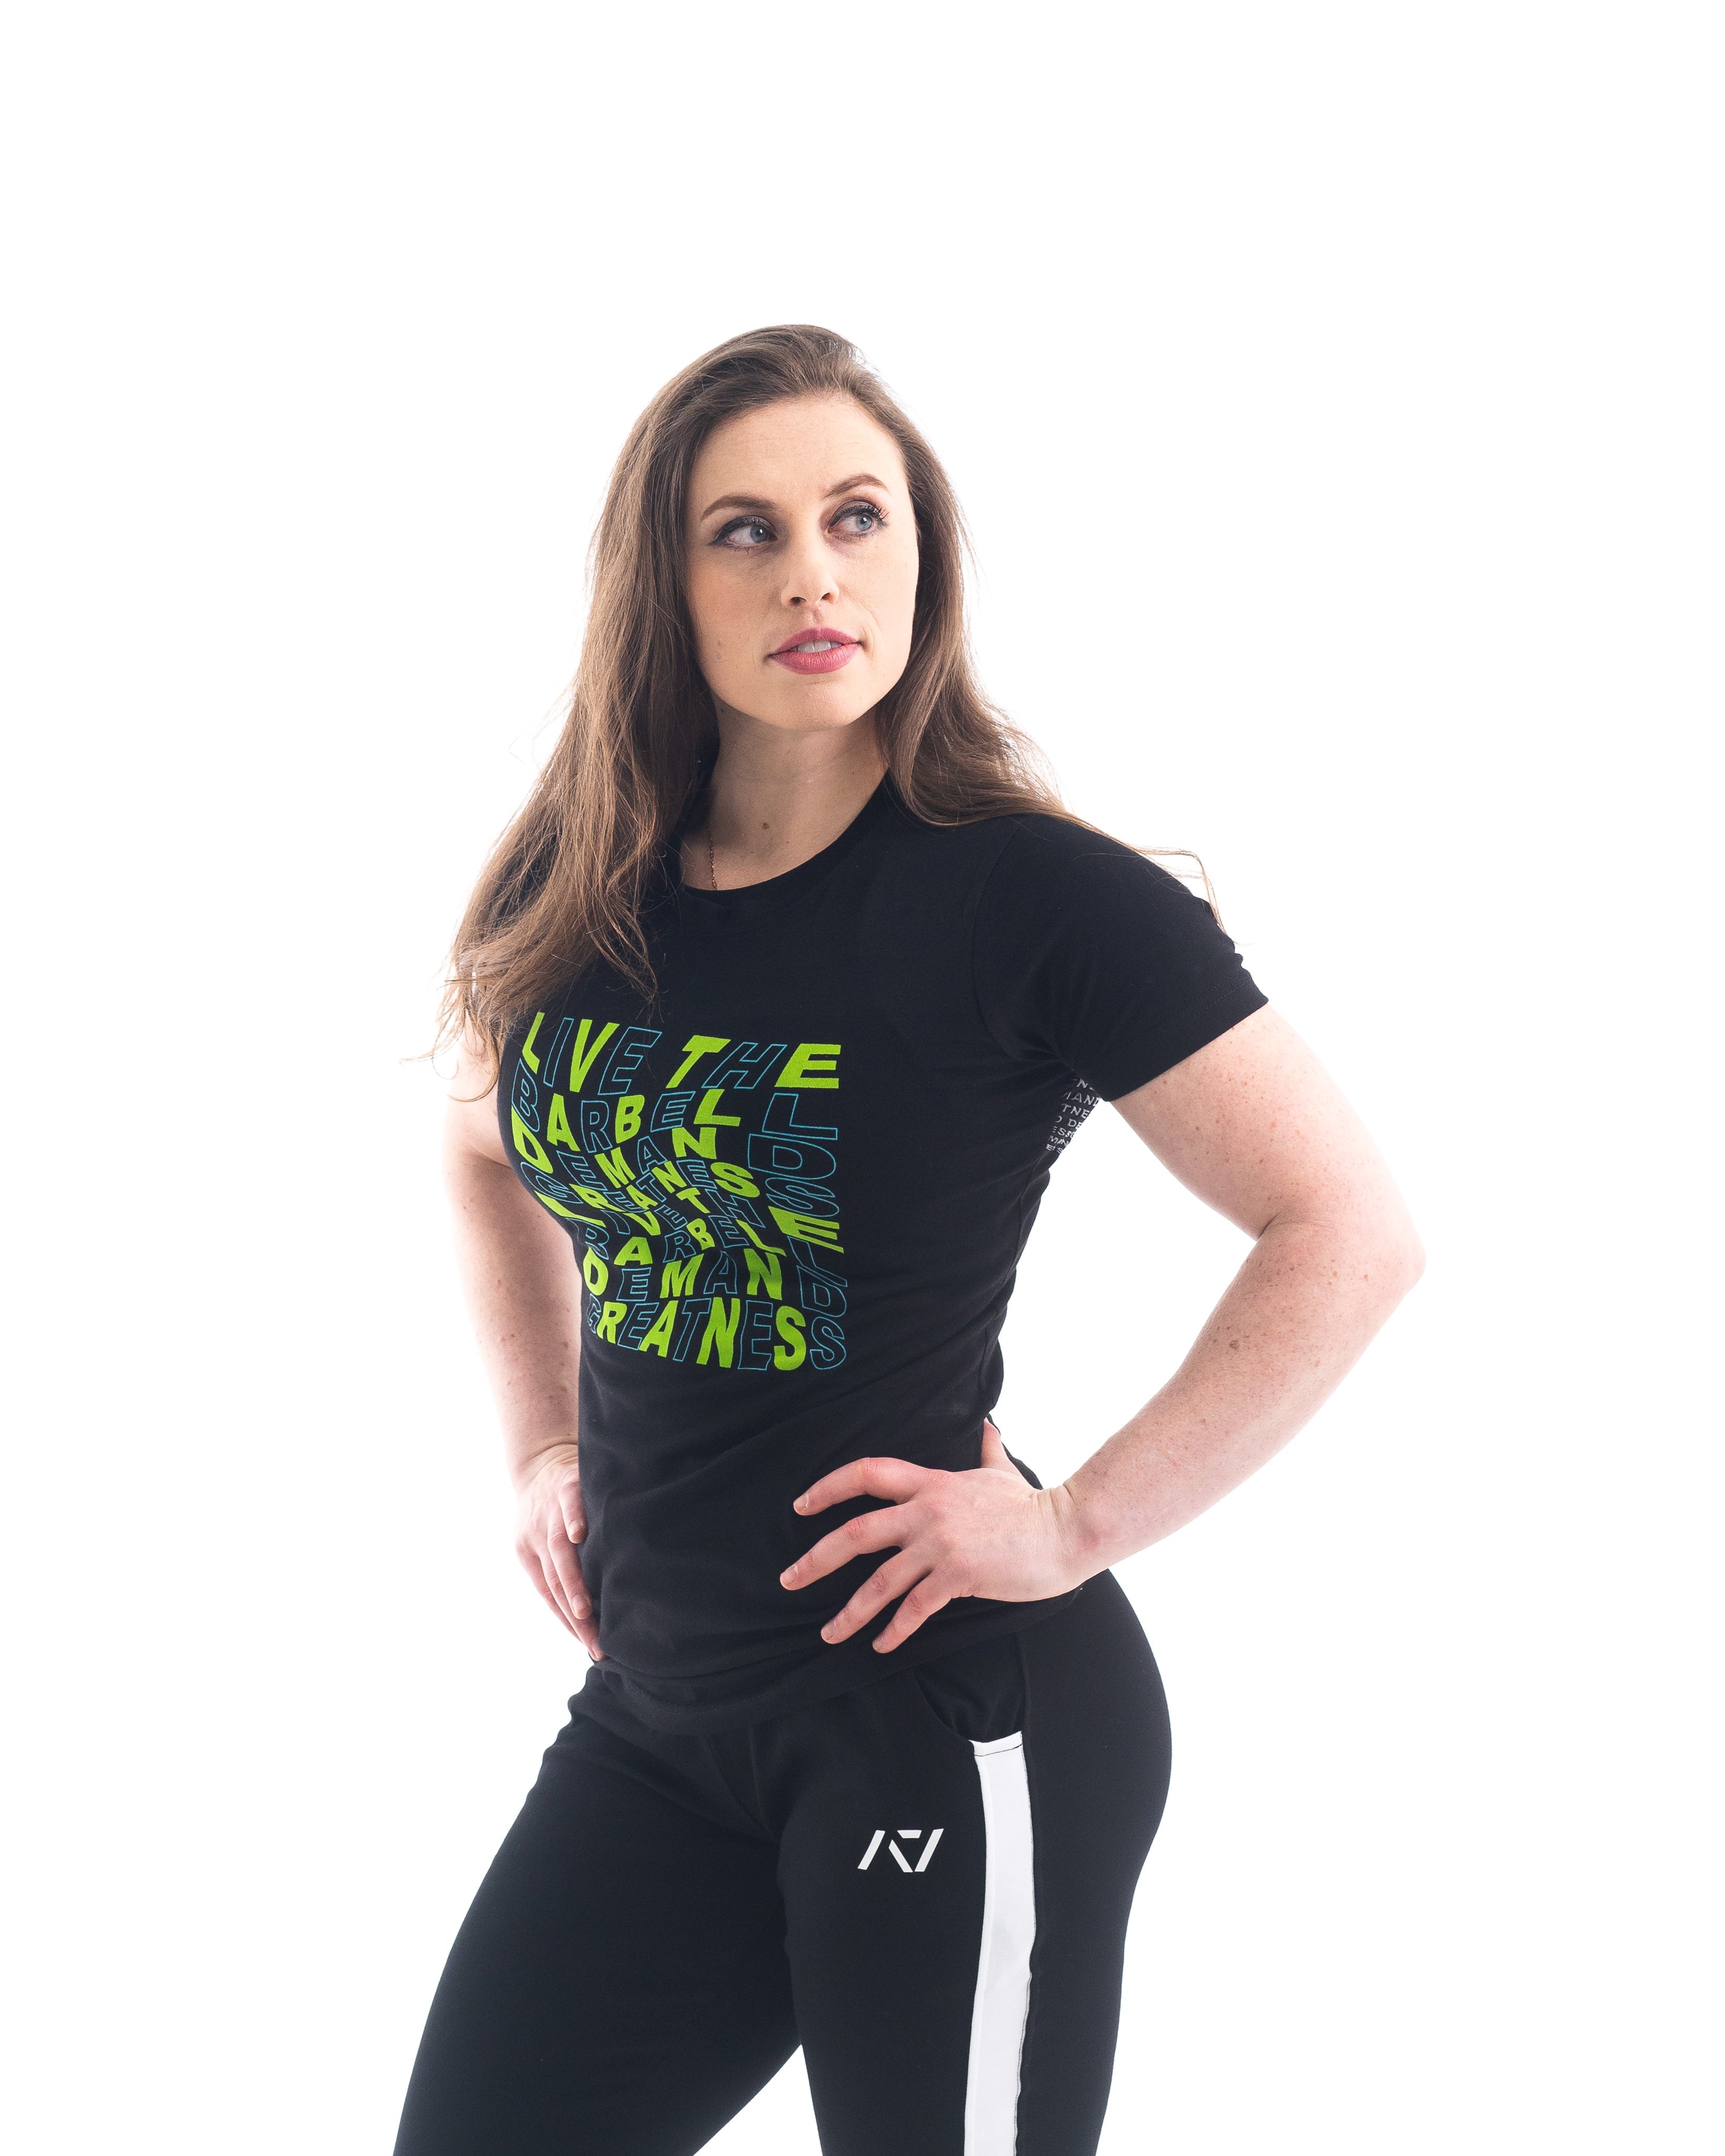 VorText Alien Women's Bar Grip Shirt. Make a stand on the platform as you continue to approach perfection to prove you are not of this world. Whether pressing, pulling, squatting or any other variational movement the knurling is always there. The silicone bar grip helps with slippery commercial benches and bars and anchors the barbell to your back. All A7 Powerlifting Equipment shipping to France, Spain, Ireland, Germany, Italy, Sweden and EU.